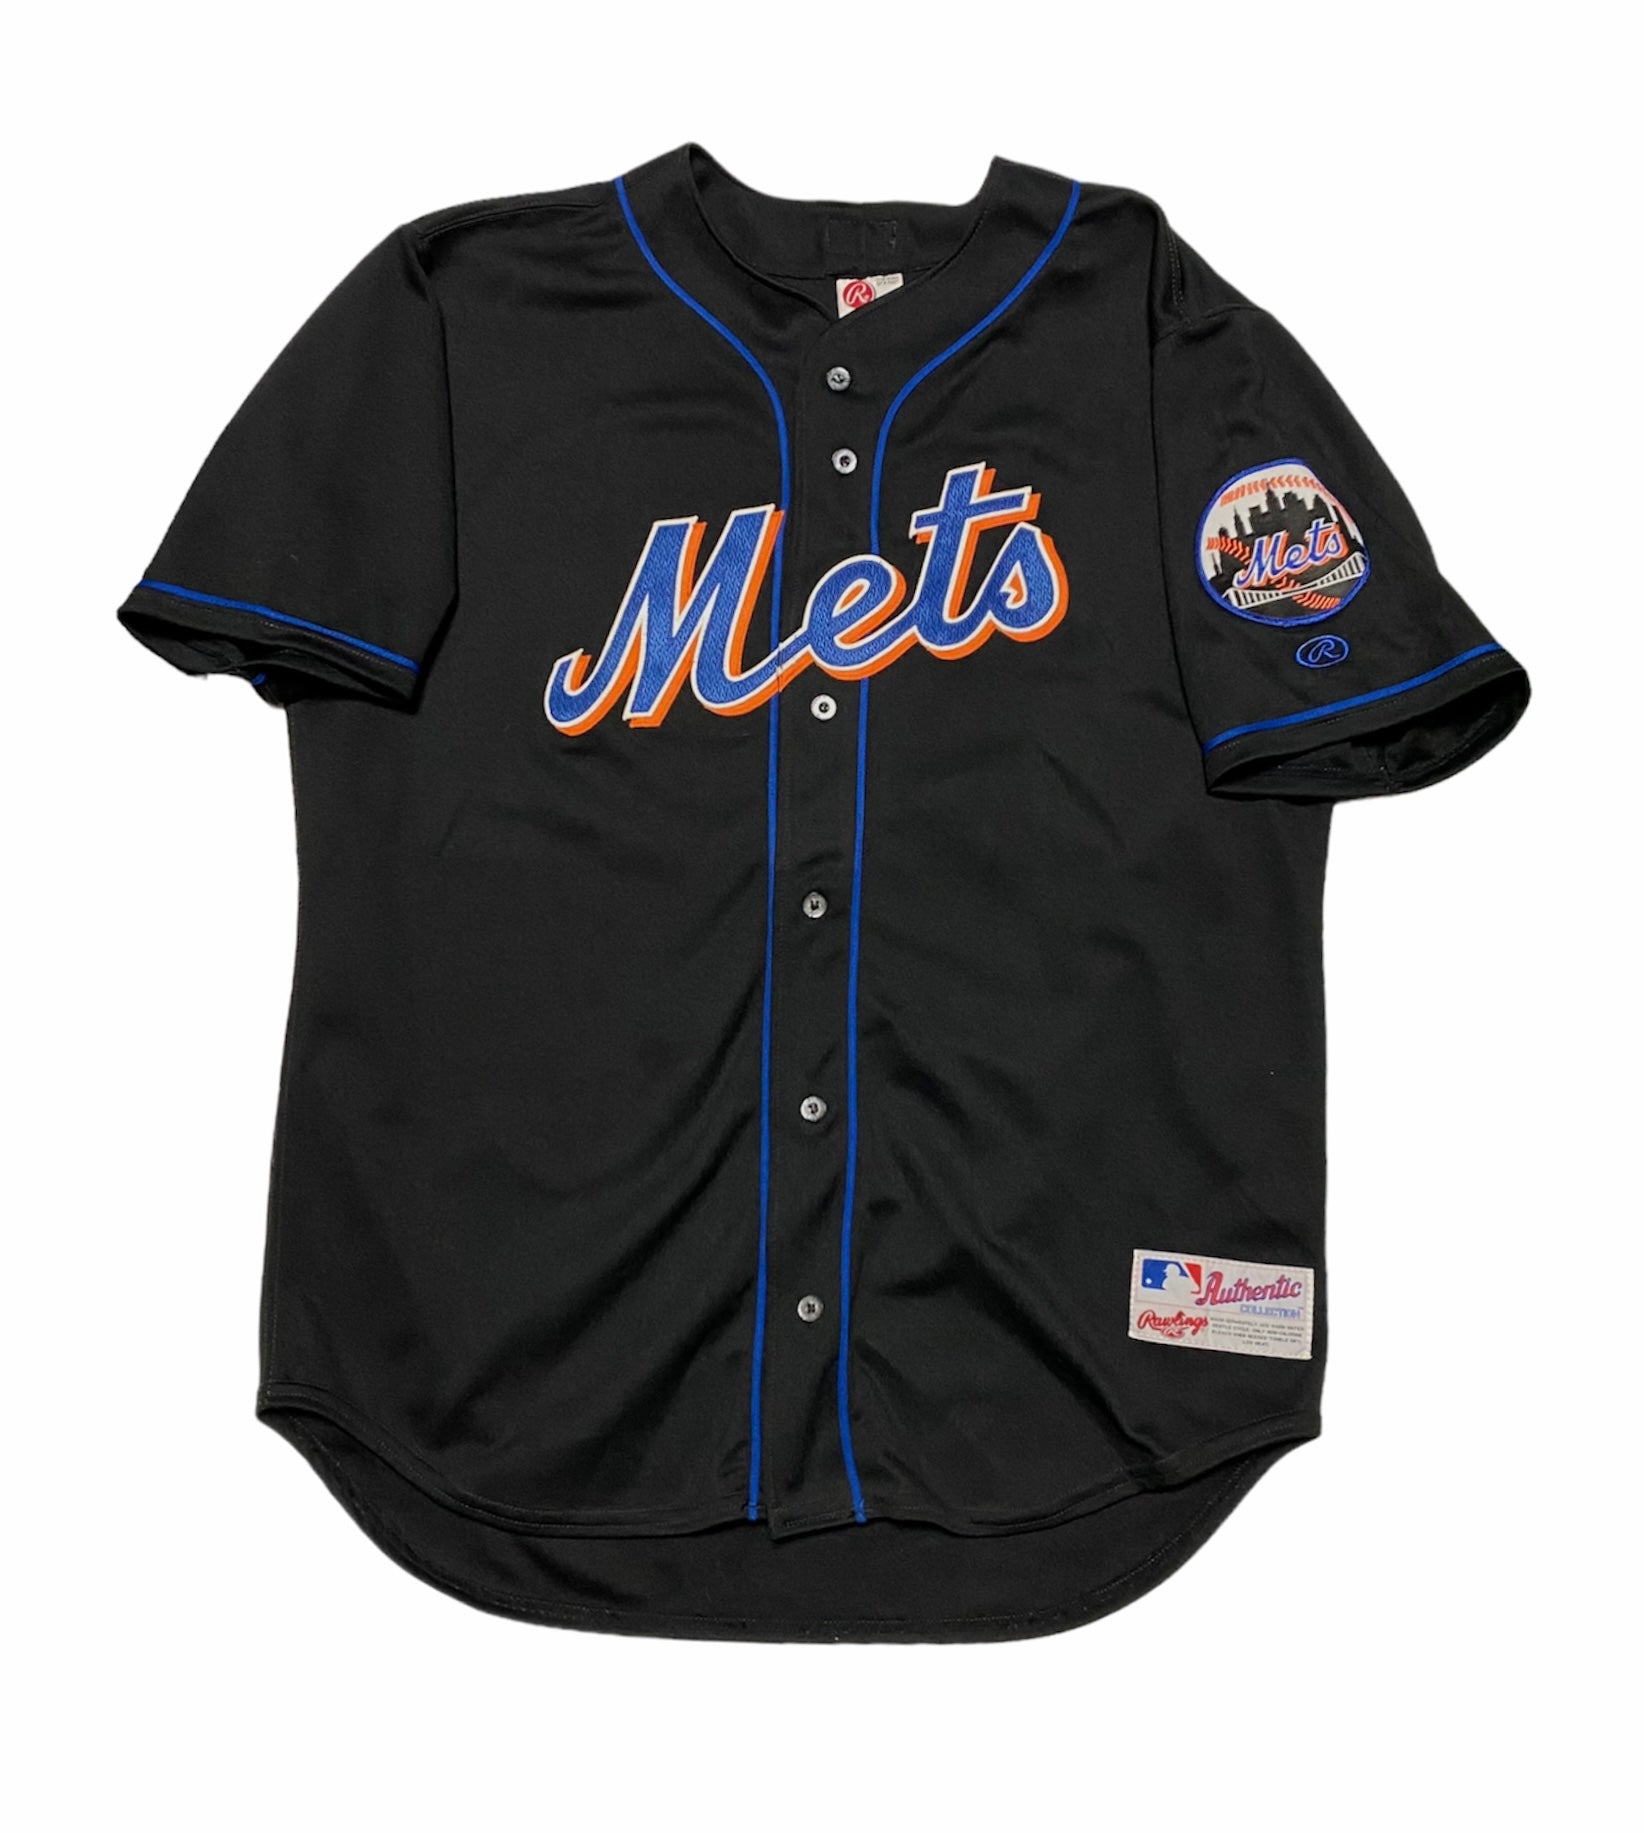 Alternate New York Mets jerseys launch on MLB Shop, exclusively through  Sunday 